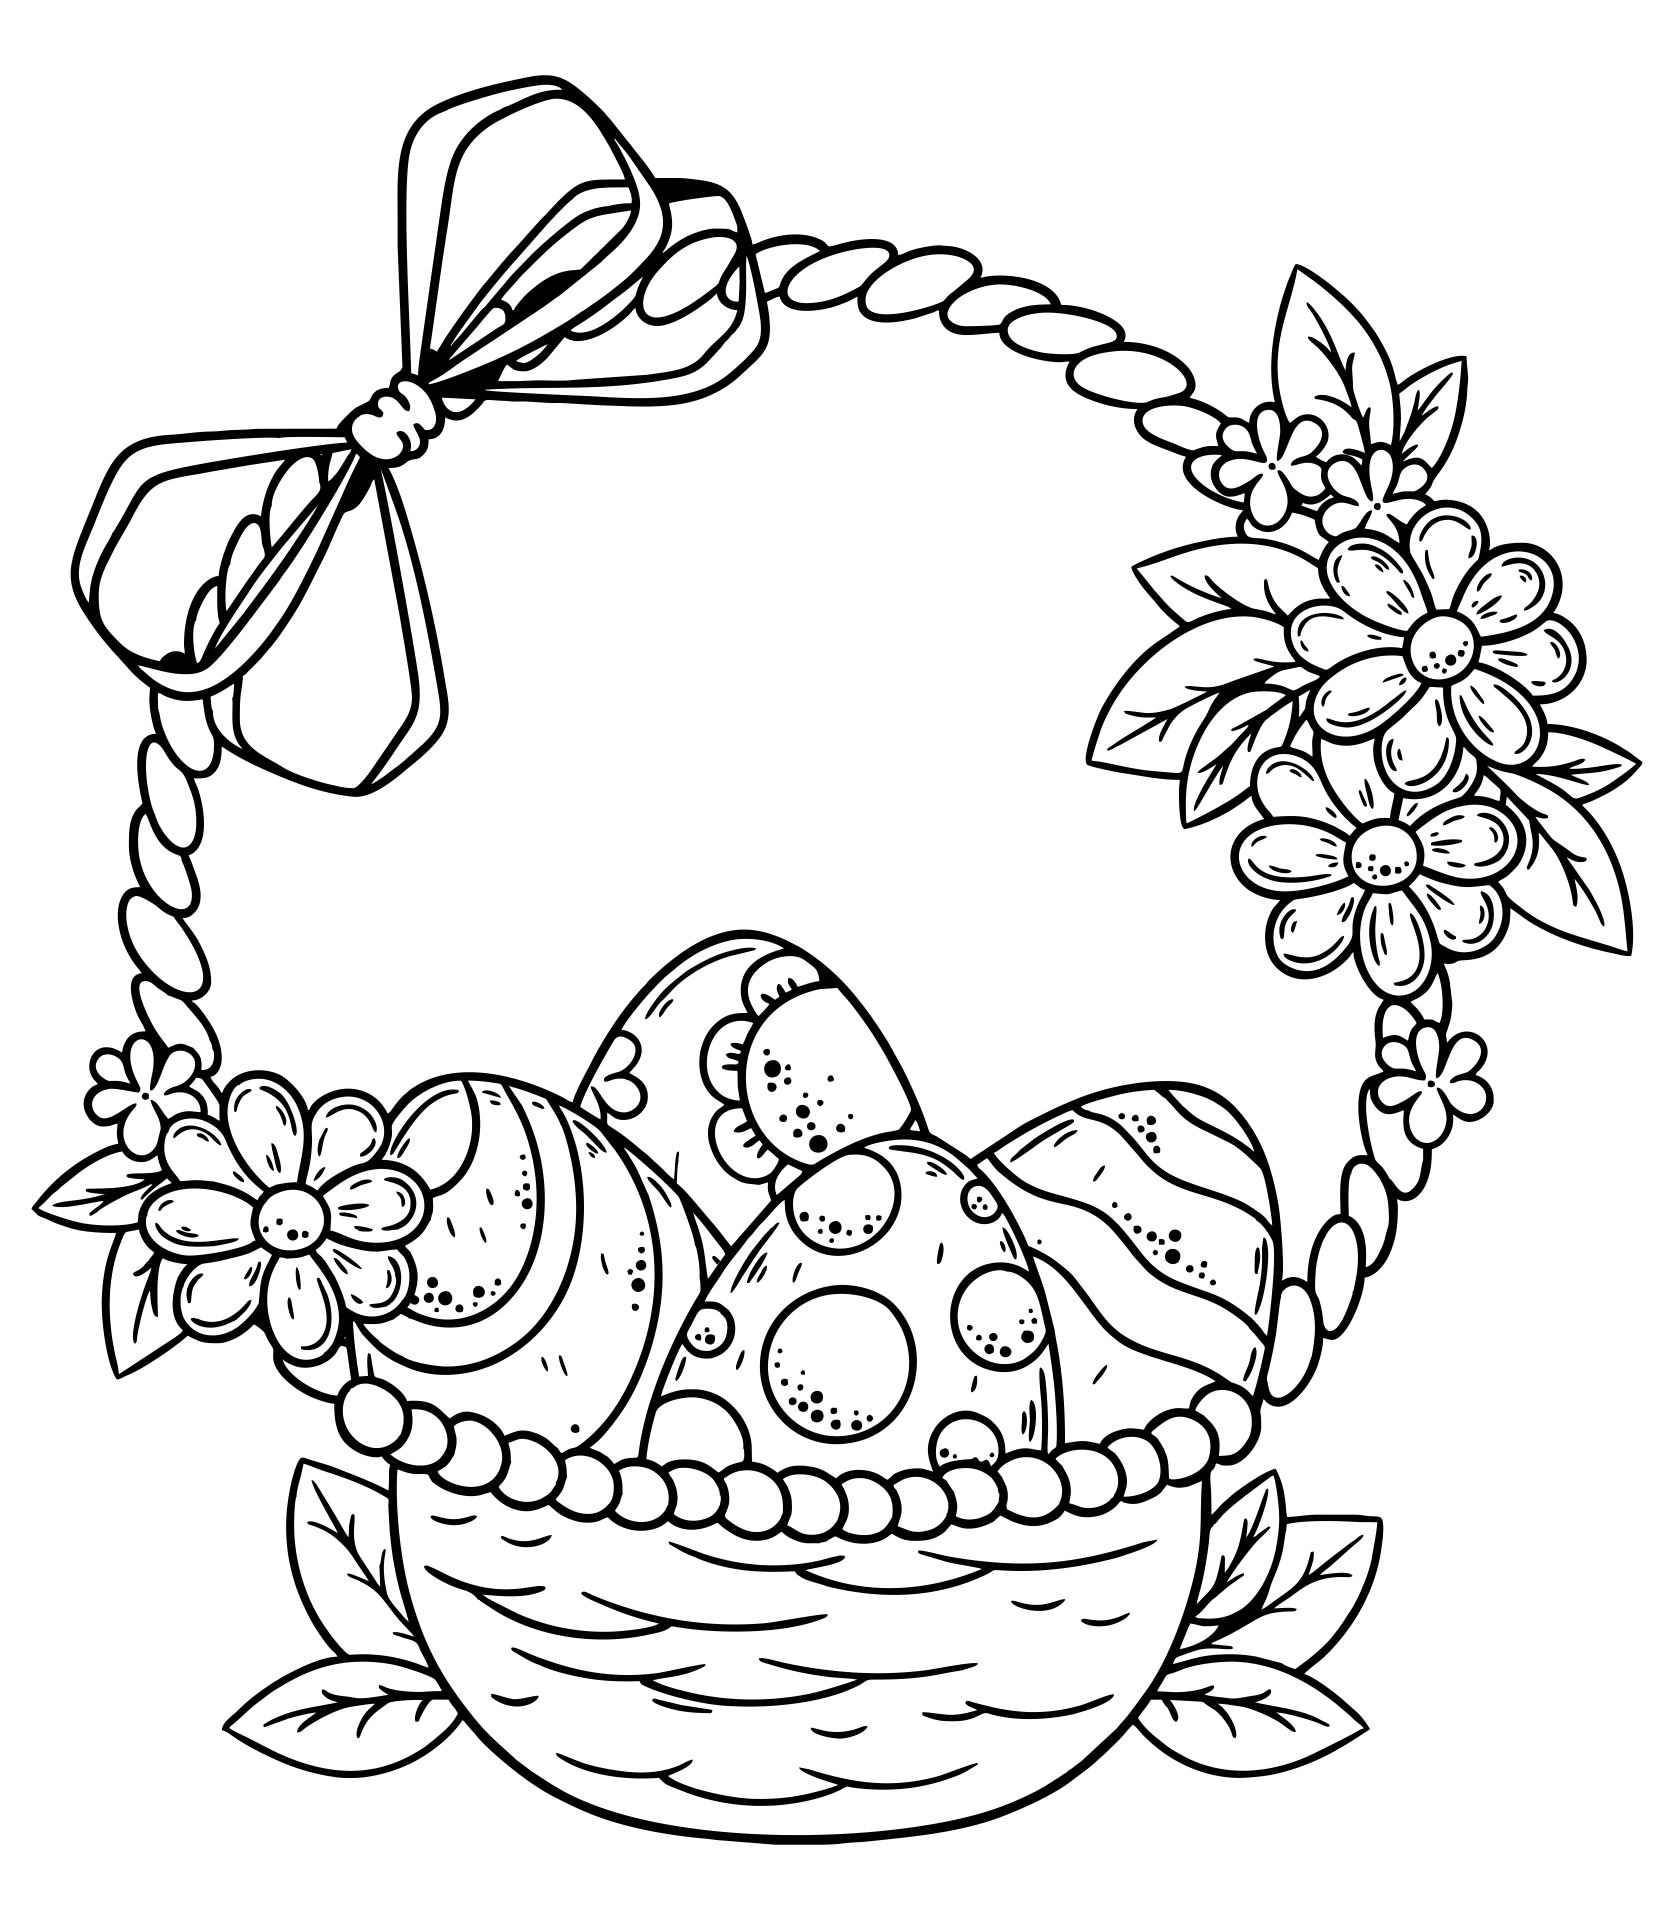 Printable Black And White Easter Coloring Pages